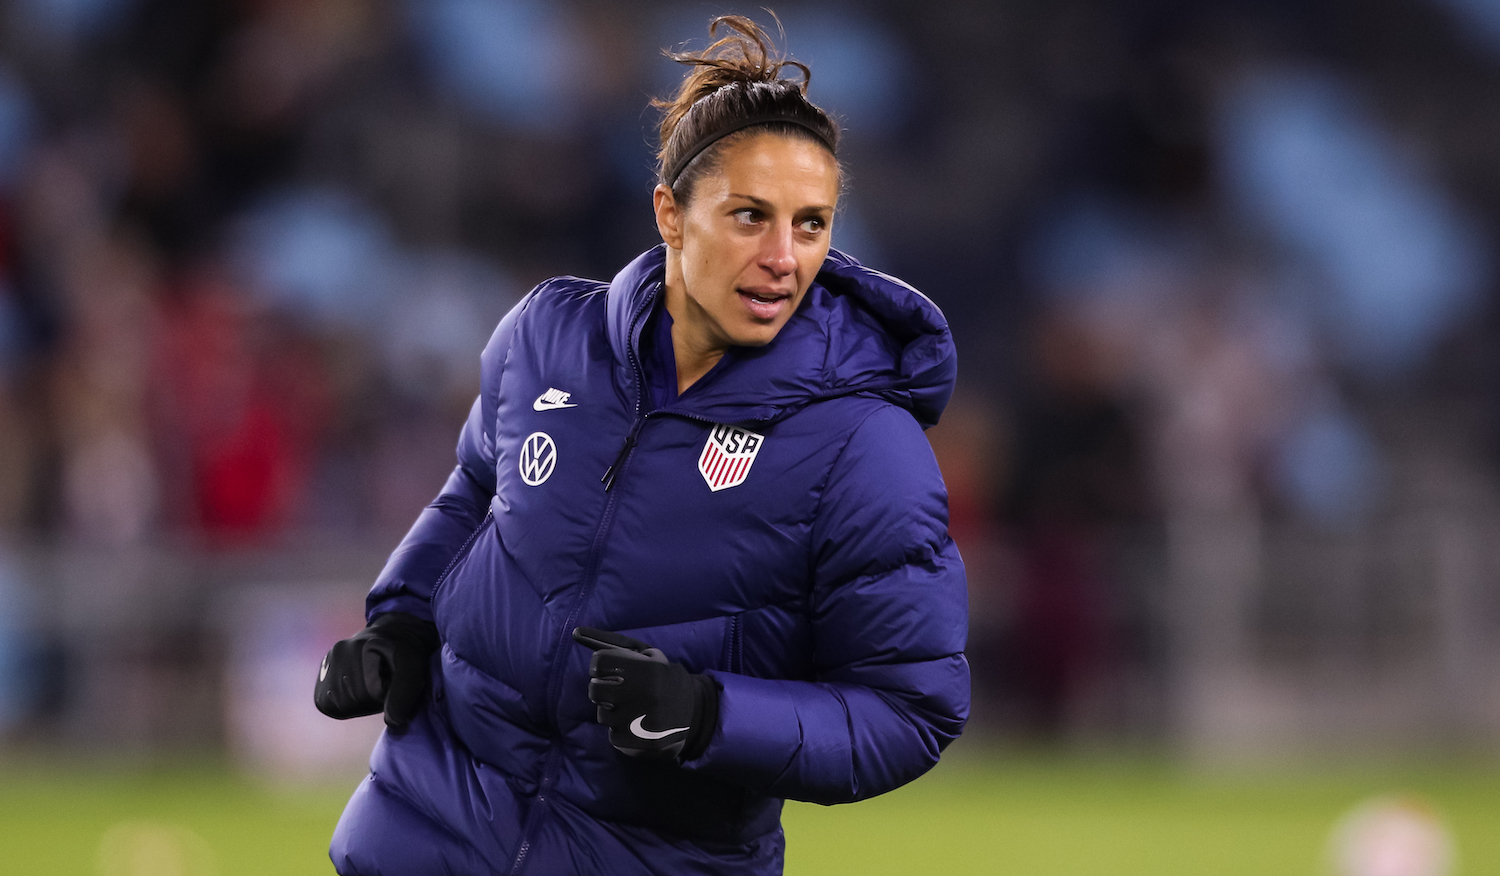 ST PAUL, MN - OCTOBER 26: Carli Lloyd #10 of United States warms up before the start of the game against Korea Republic at Allianz Field on October 26, 2021 in St Paul, Minnesota. United States defeated Korea Republic 6-0. (Photo by David Berding/Getty Images)